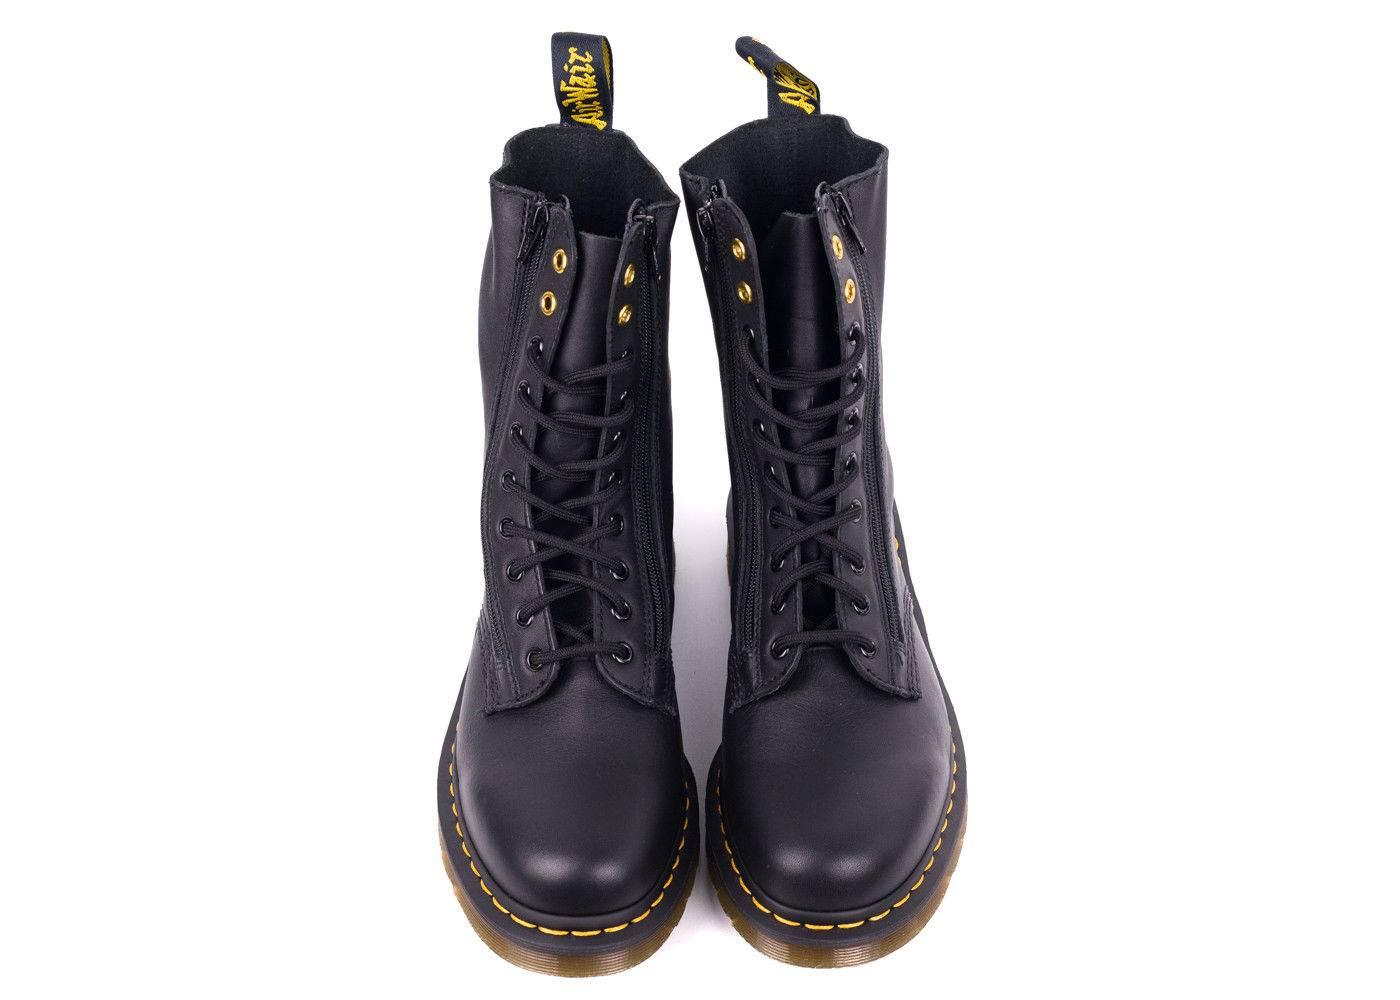 Yohji Yamamoto X Dr. Martens Mens Black Leather Combat Boots In New Condition For Sale In Brooklyn, NY